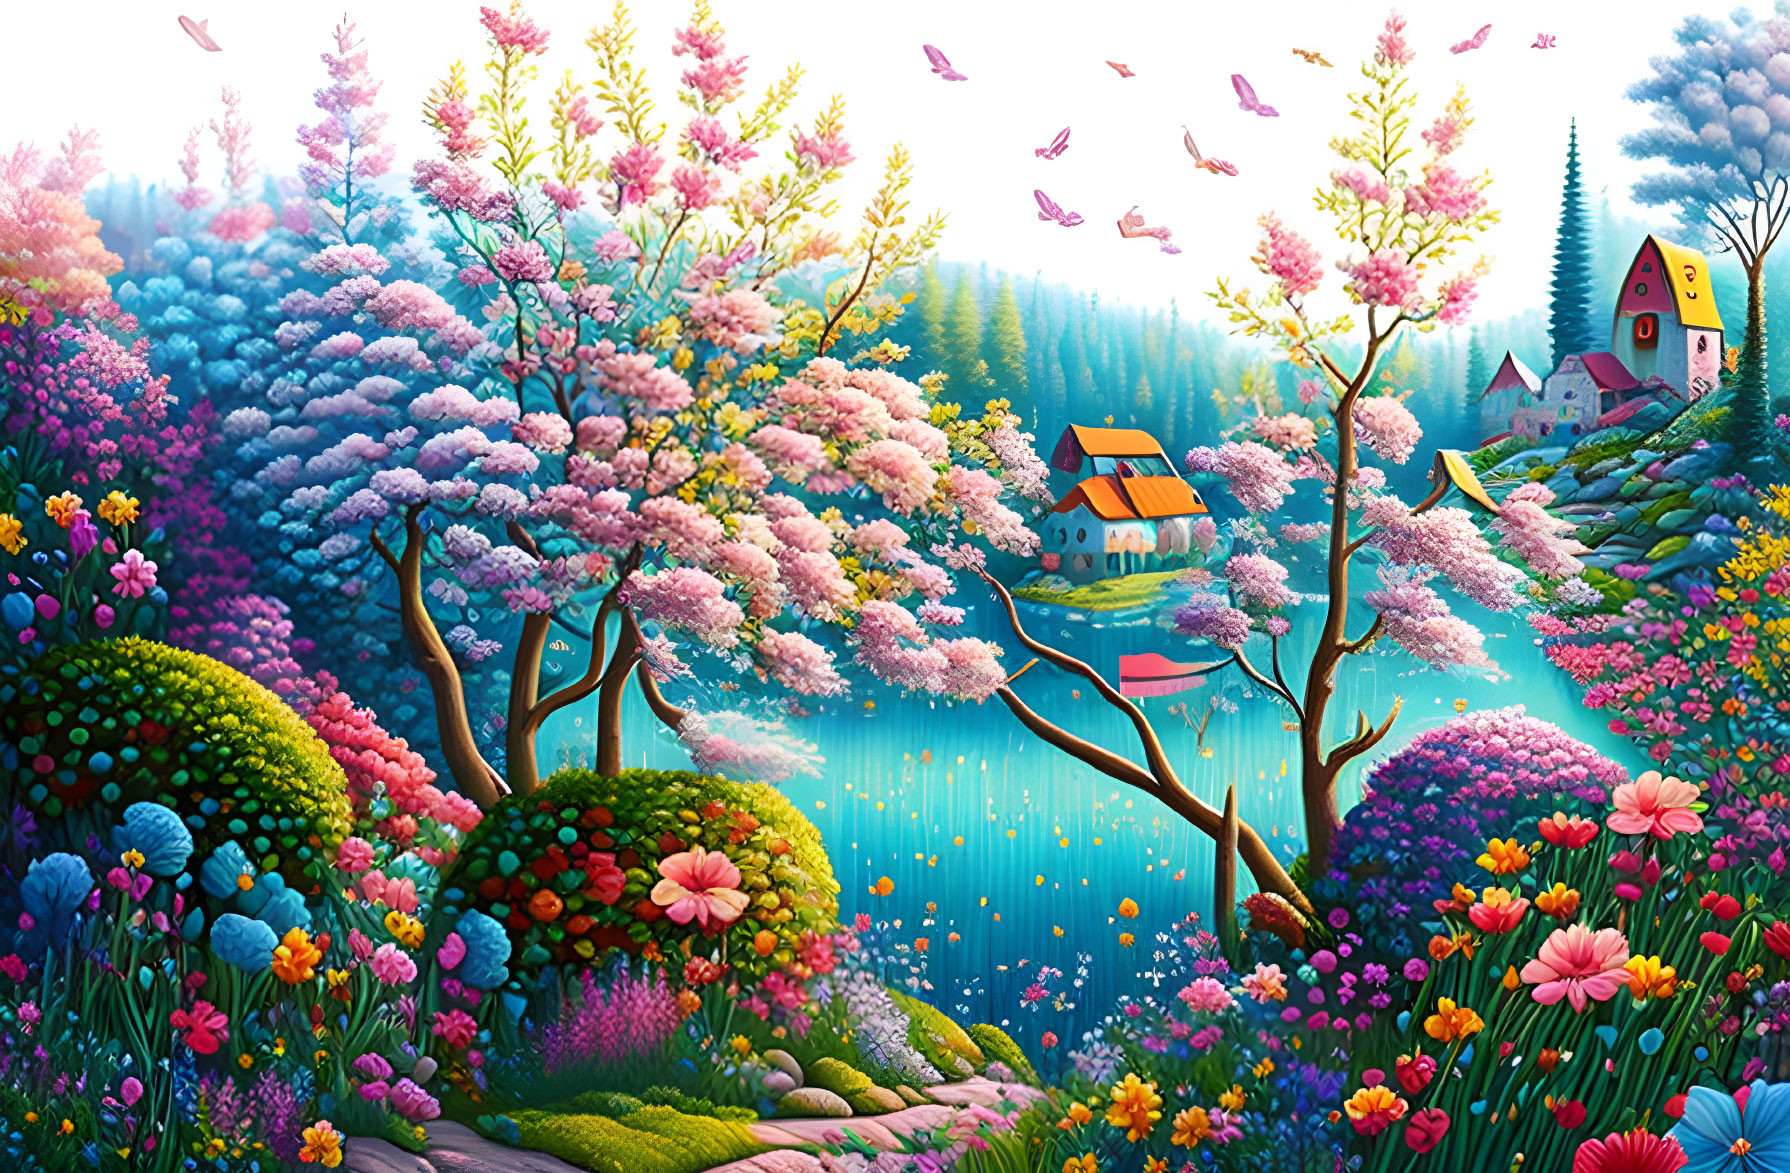 Colorful Fantasy Landscape with River, Village, and Butterflies